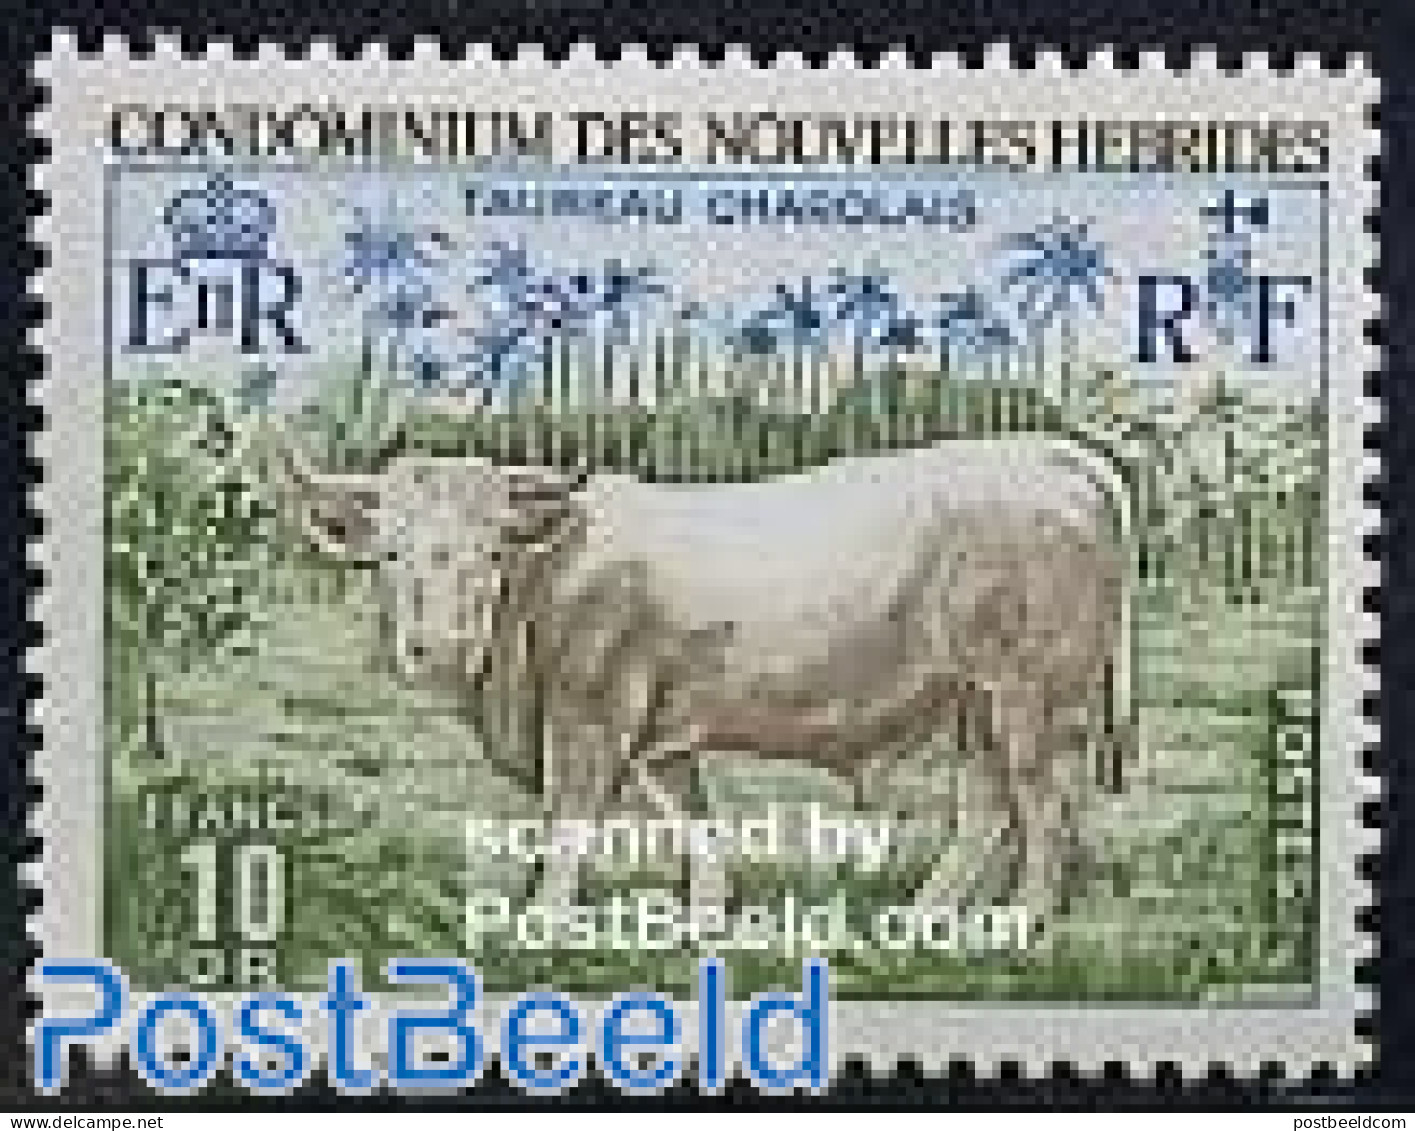 New Hebrides 1975 Definitive 1v F, Mint NH, Nature - Animals (others & Mixed) - Cattle - Ungebraucht